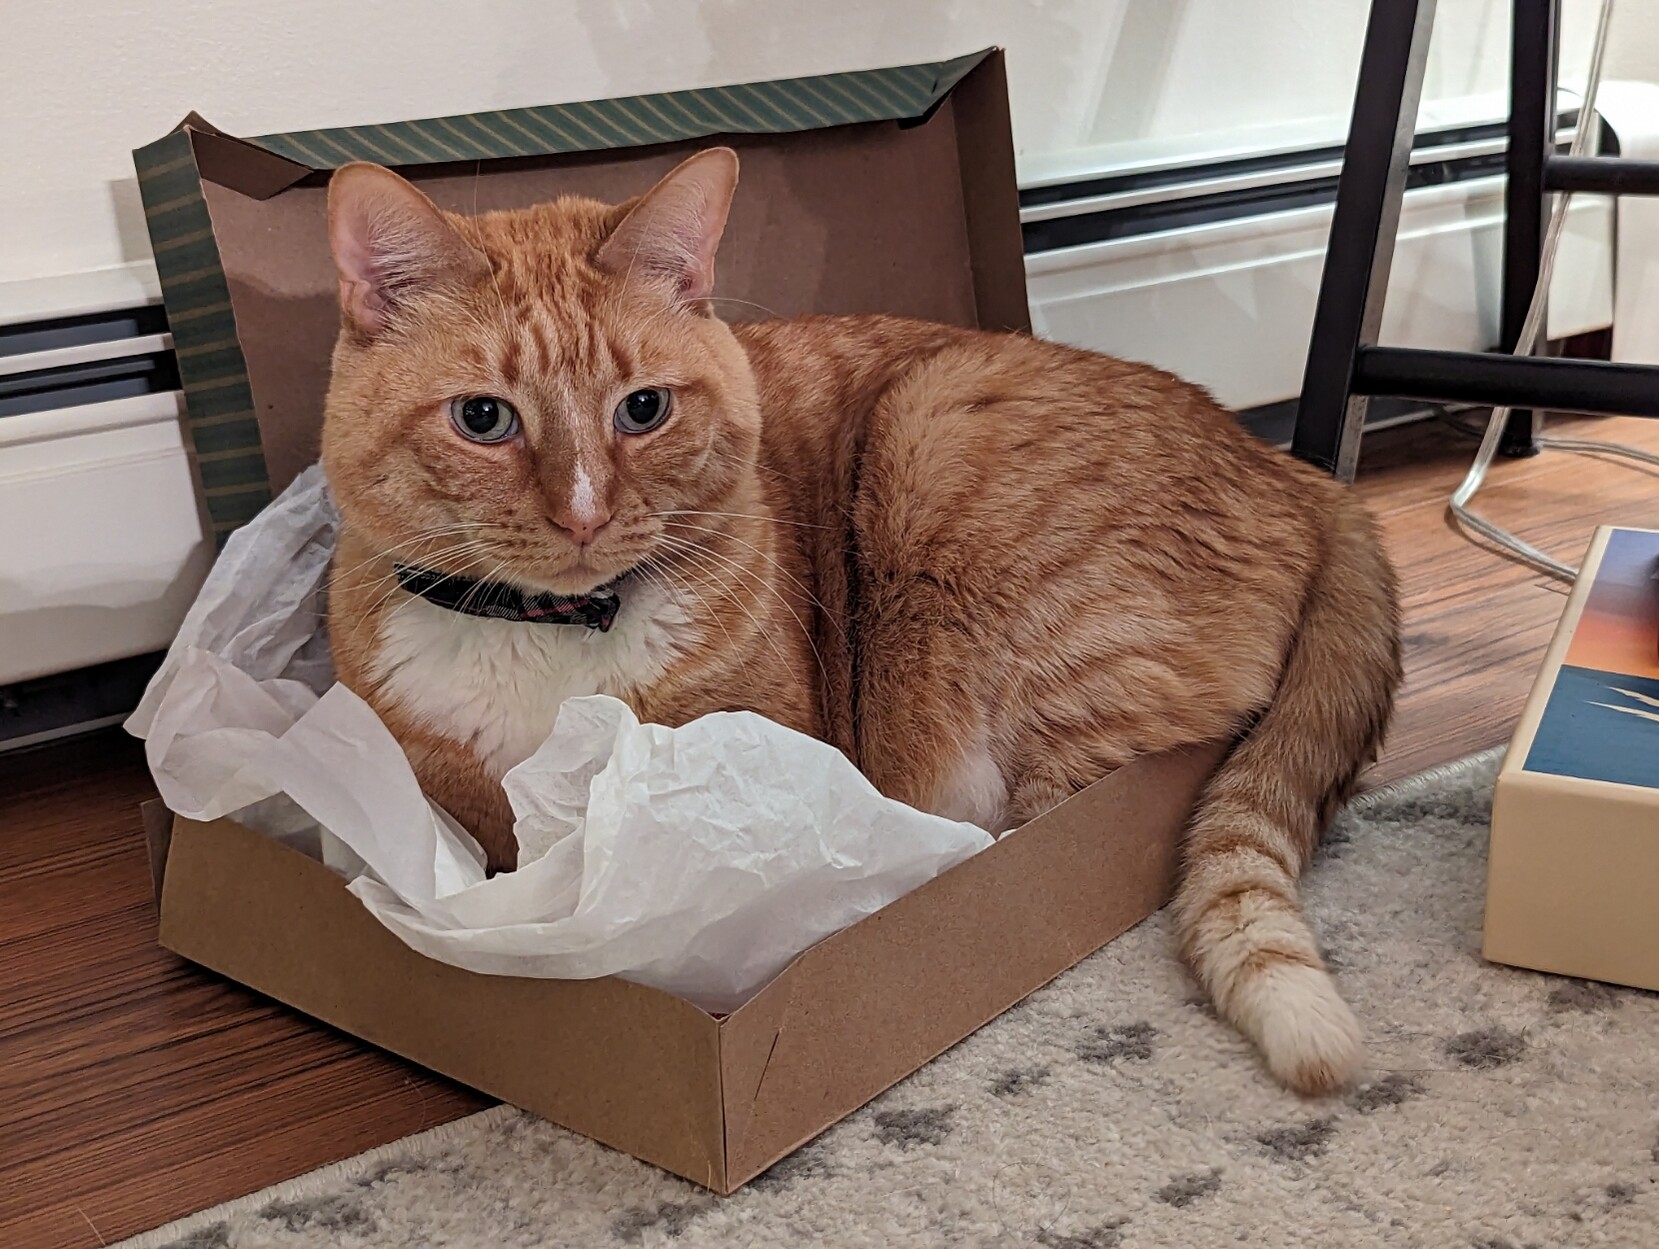 A handsome orange and white cat curled up inside a gift box